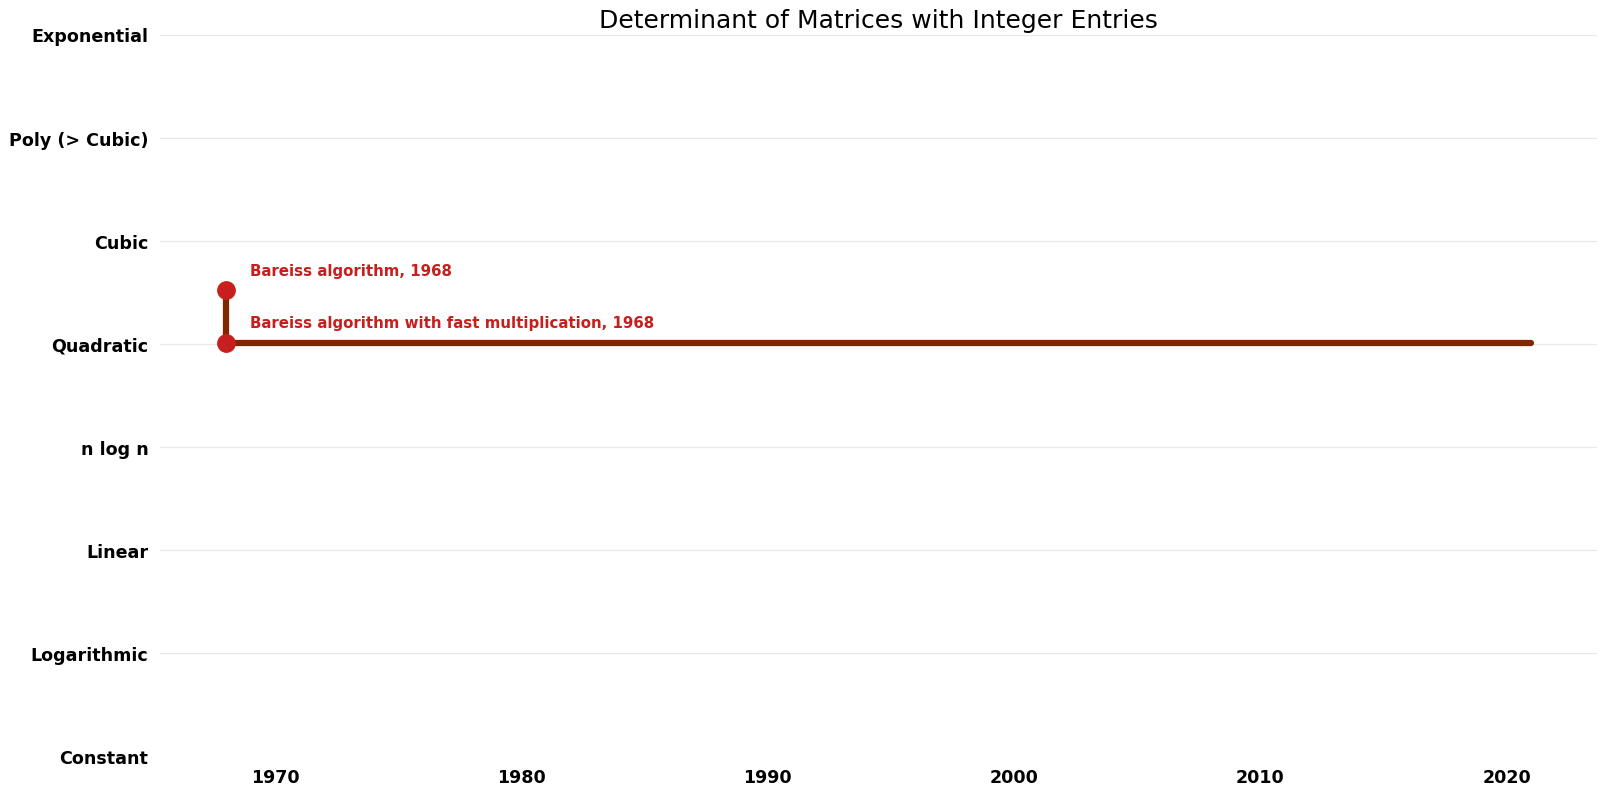 File:Determinant of Matrices with Integer Entries - Time.png